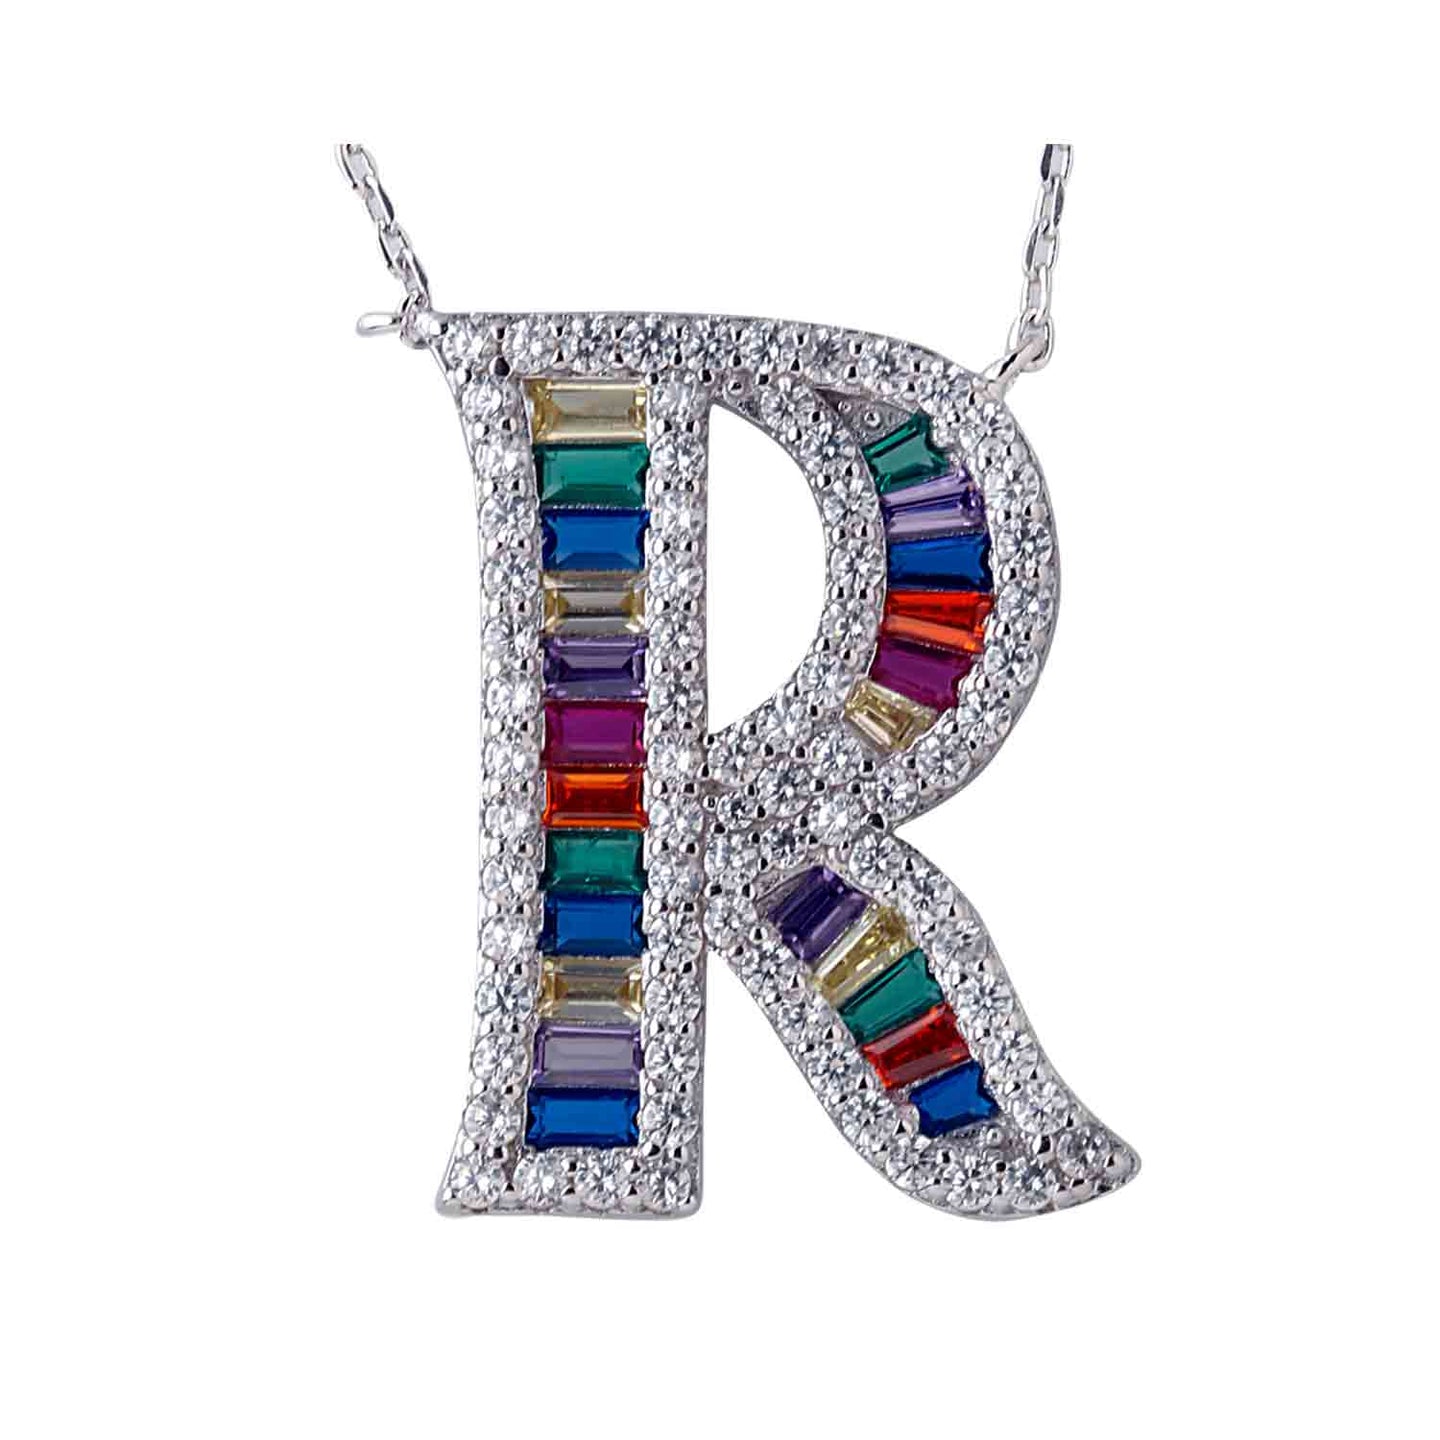 Letter R Initials 925 Sterling Silver Pendant From The Collection Of Alphabet Pendants From CaratCafe